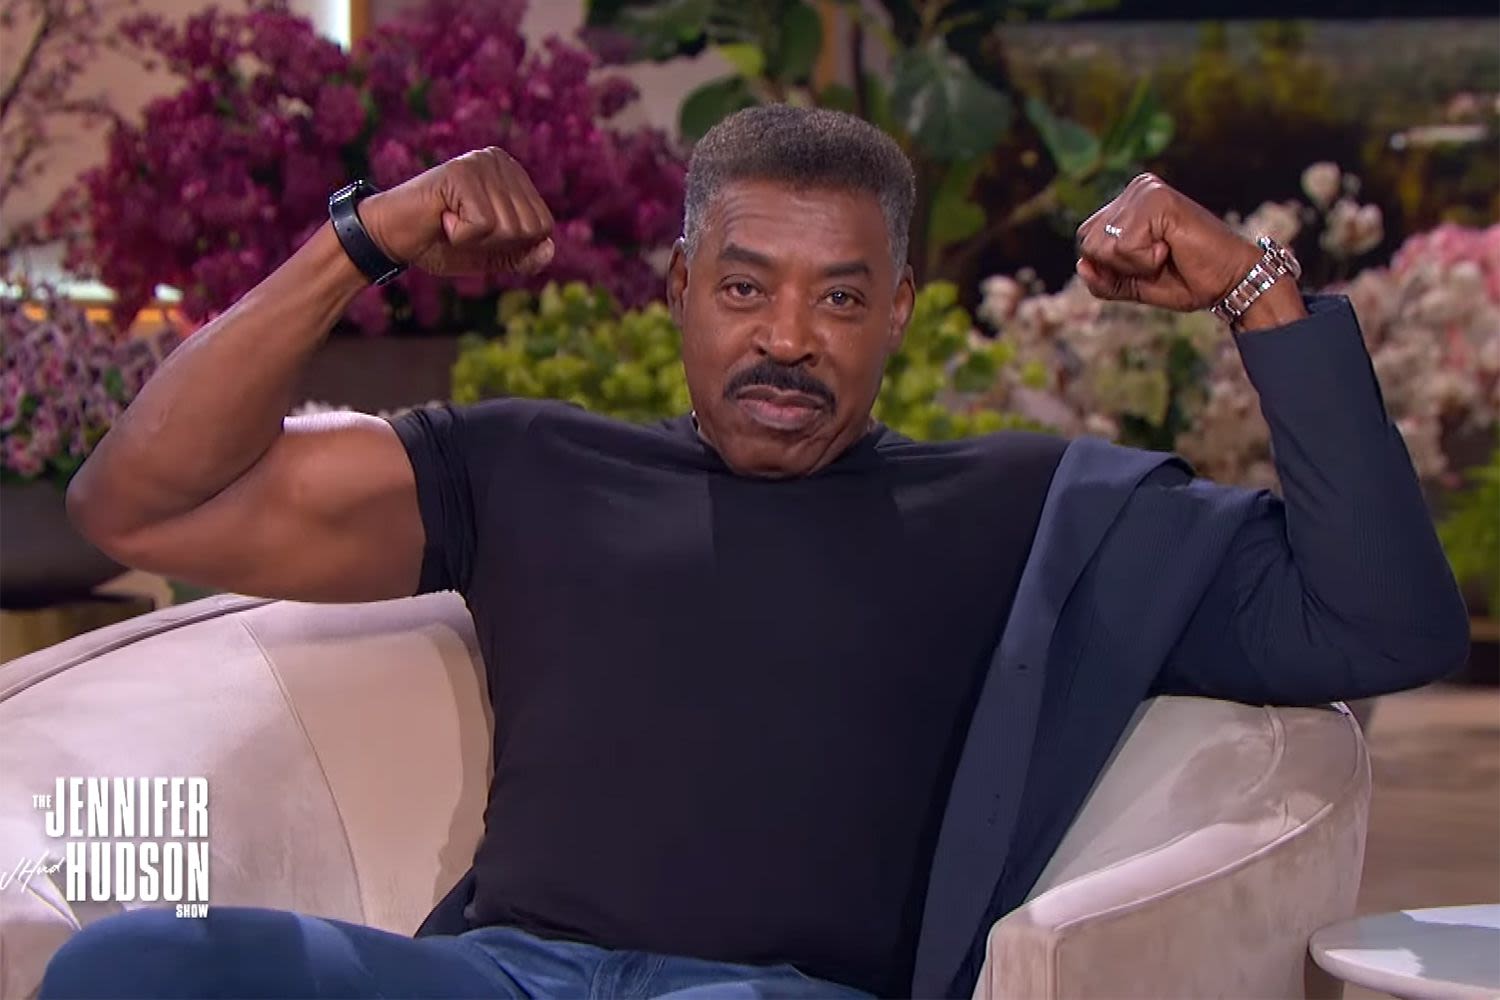 Jennifer Hudson Calls for Ernie Hudson to Be 'Sexiest Man Alive' as He Flexes His Arms on Her Show